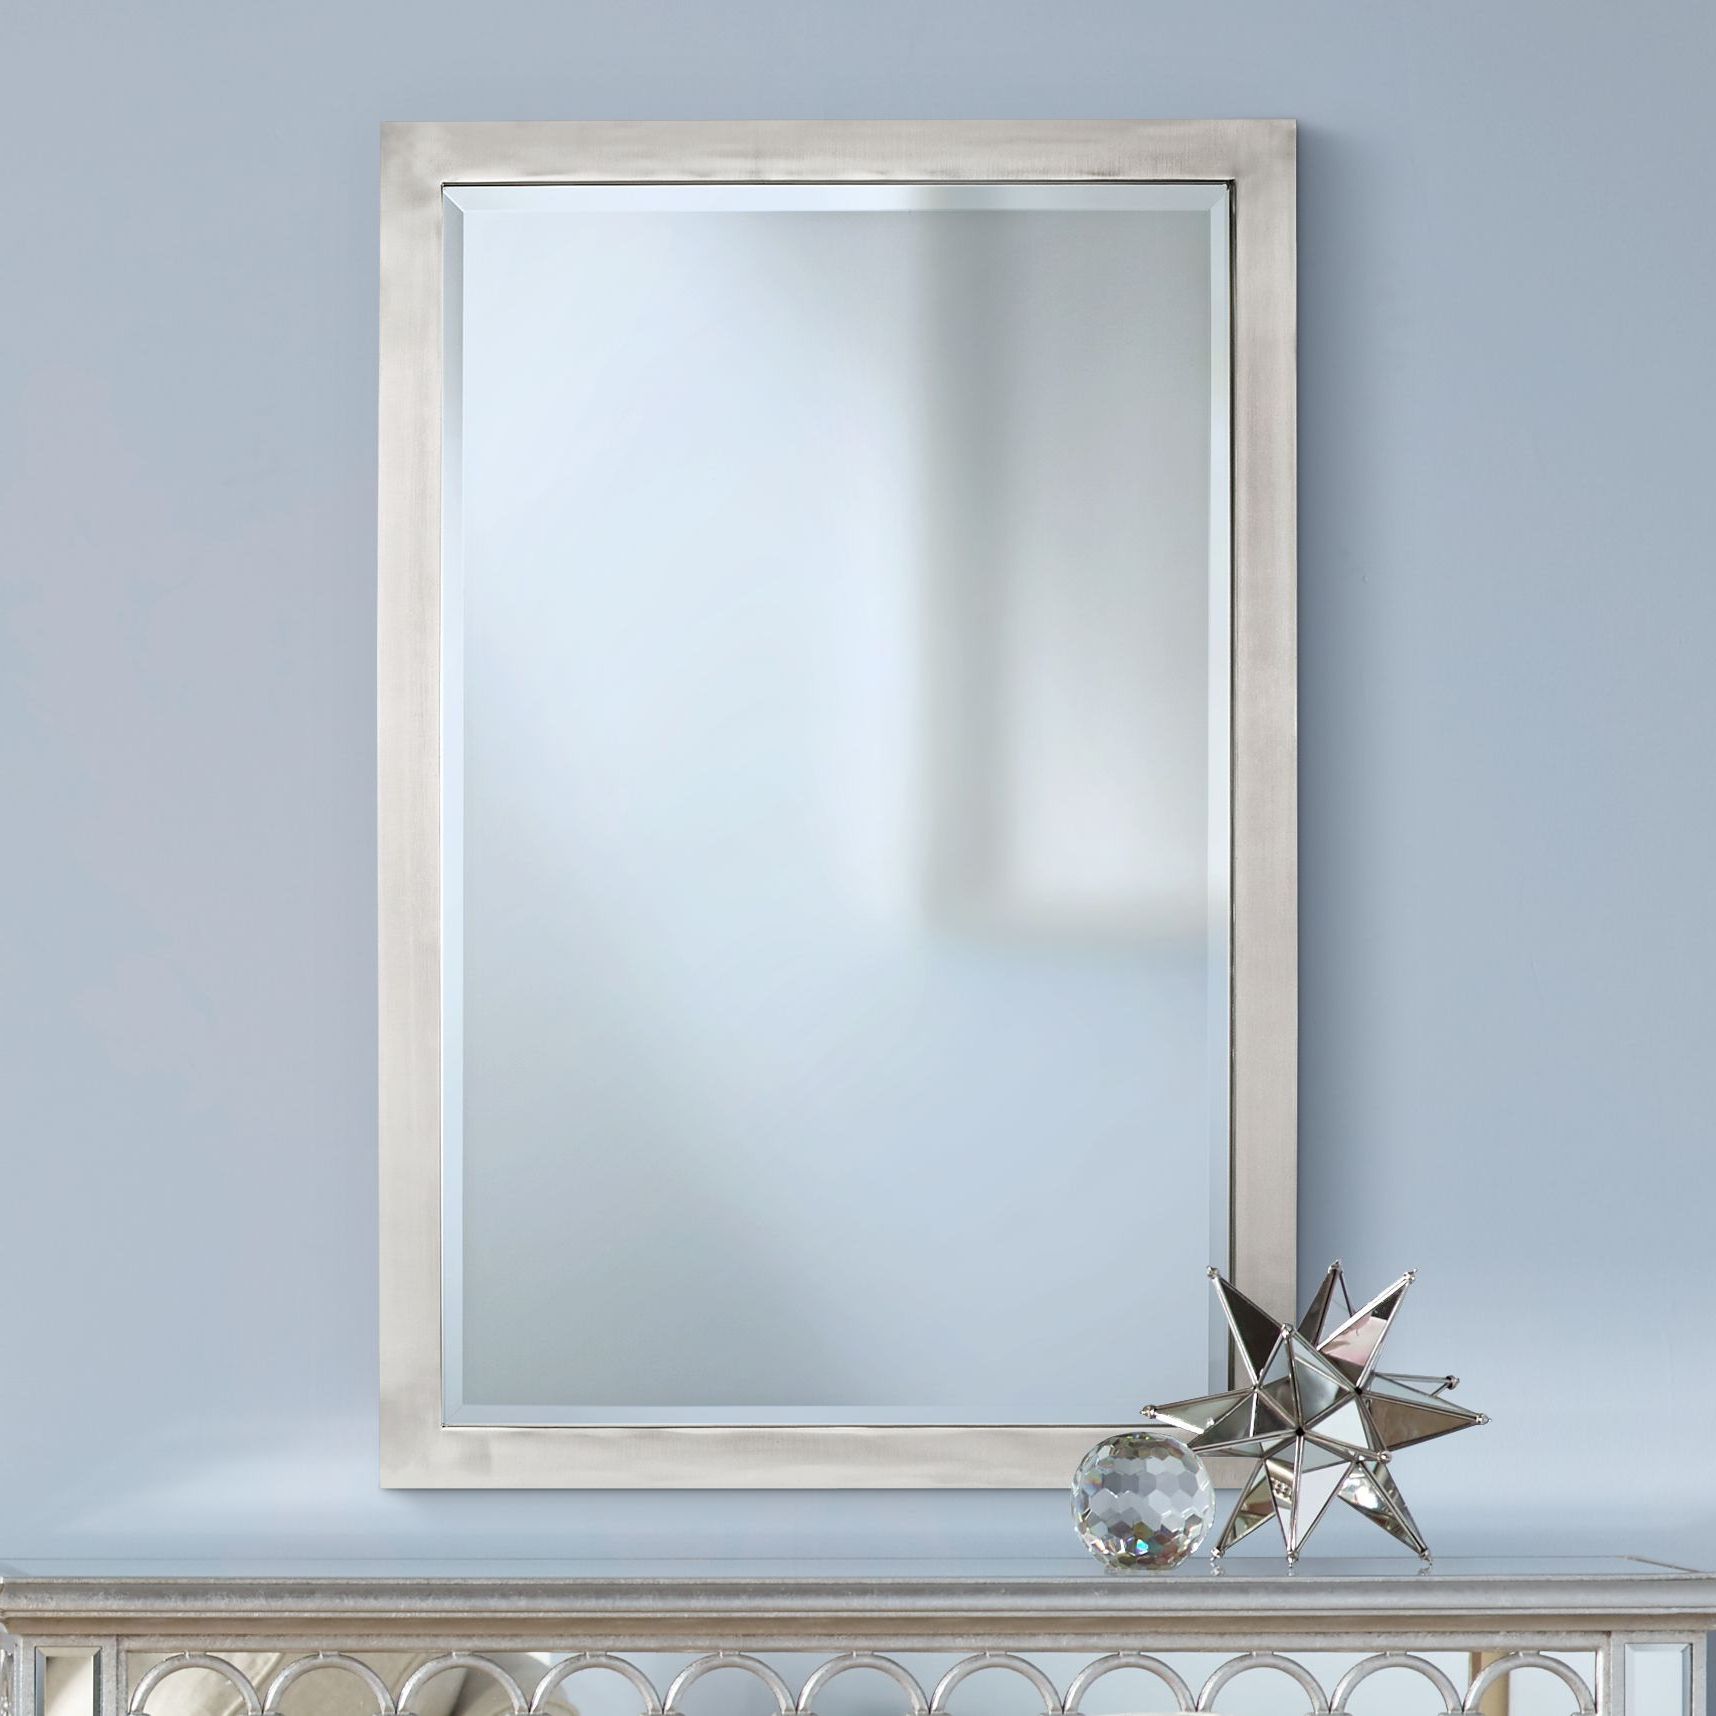 Metzeo 33" X 22" Brushed Nickel Wall Mirror – #t (View 8 of 15)